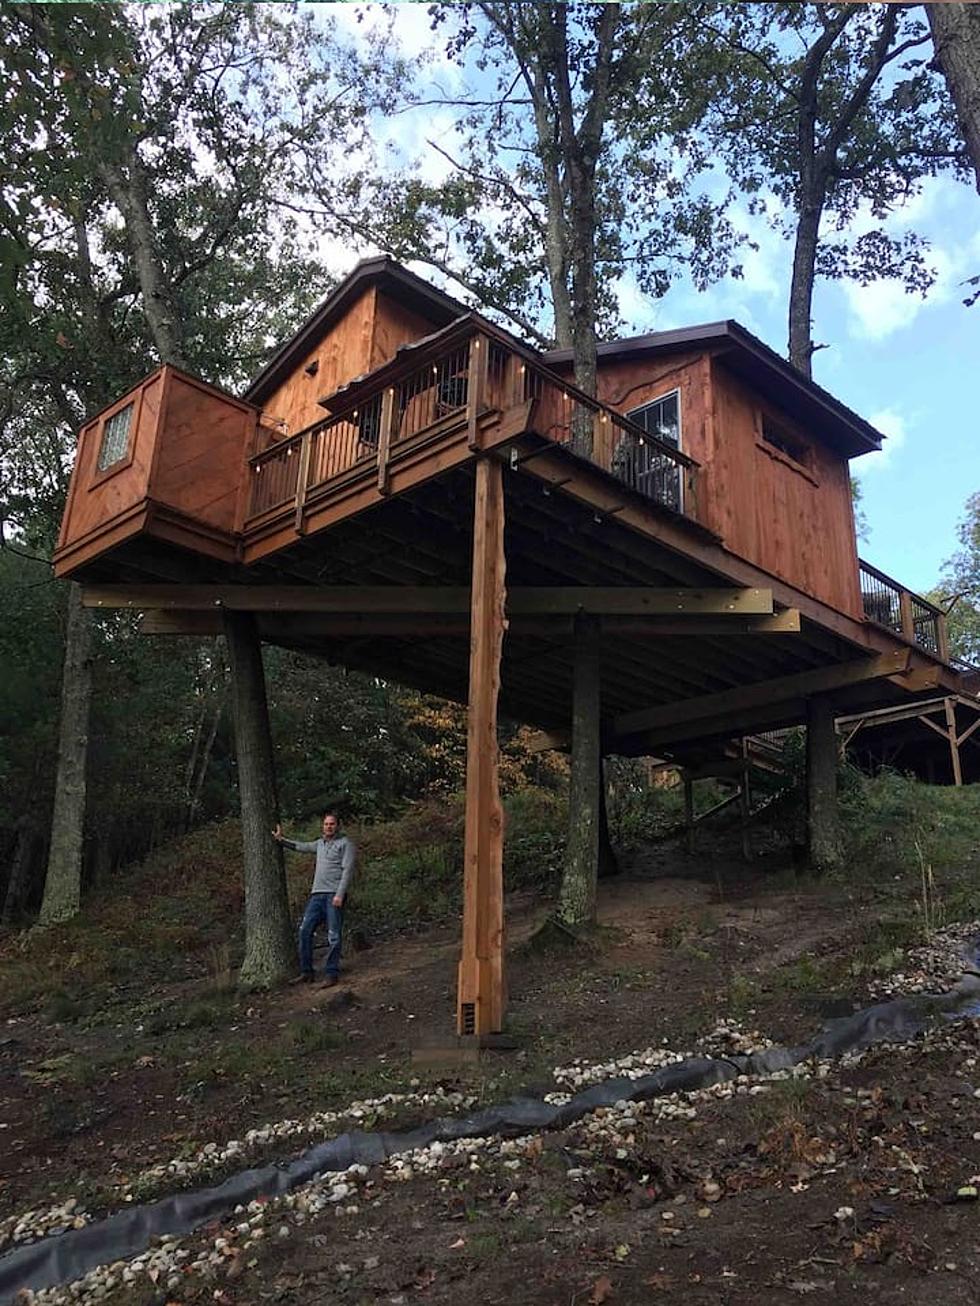 You Can Rent This Treehouse in Michigan For a Relaxing Summer Vacation